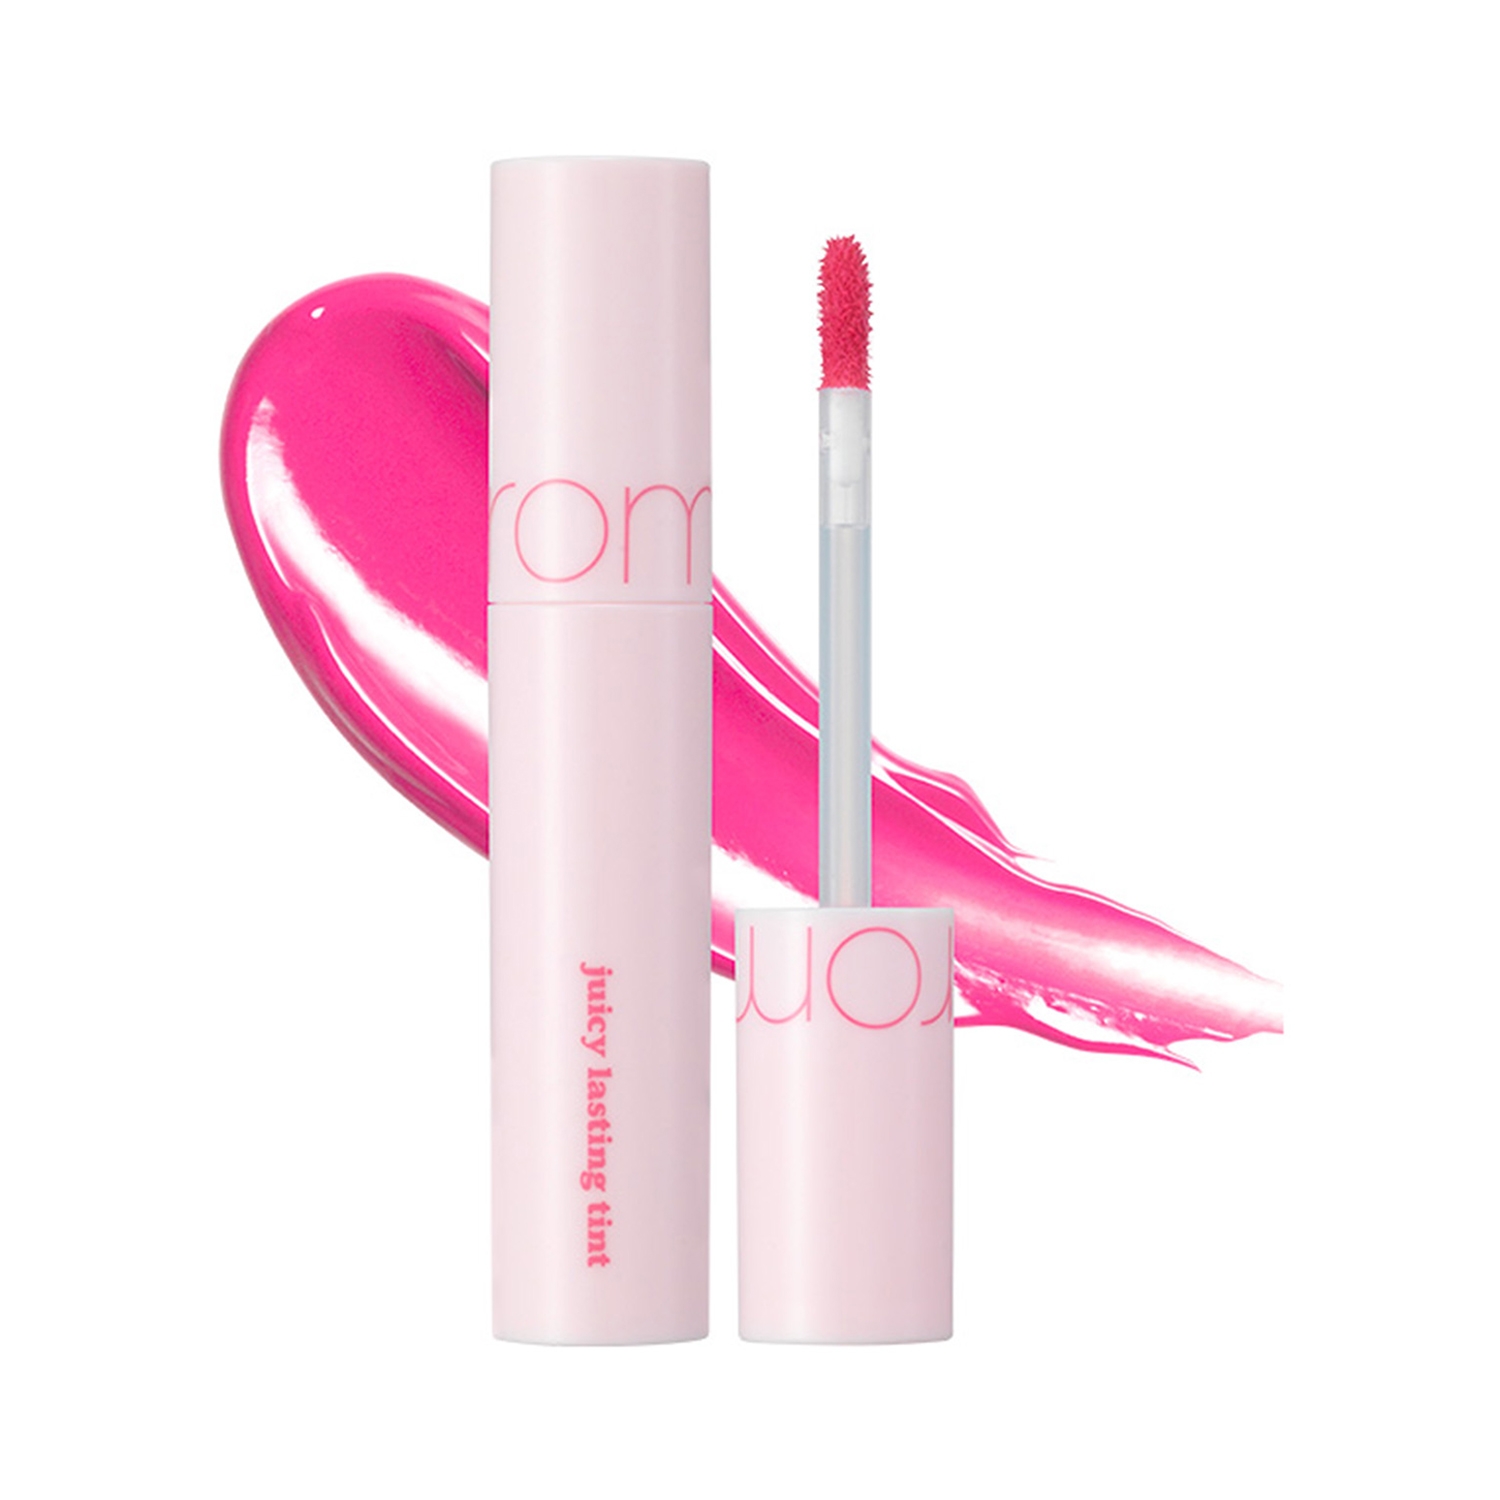 Rom&nd | Rom&nd Juicy Lasting Tint - 26 Very Berry Pink (5.5g)